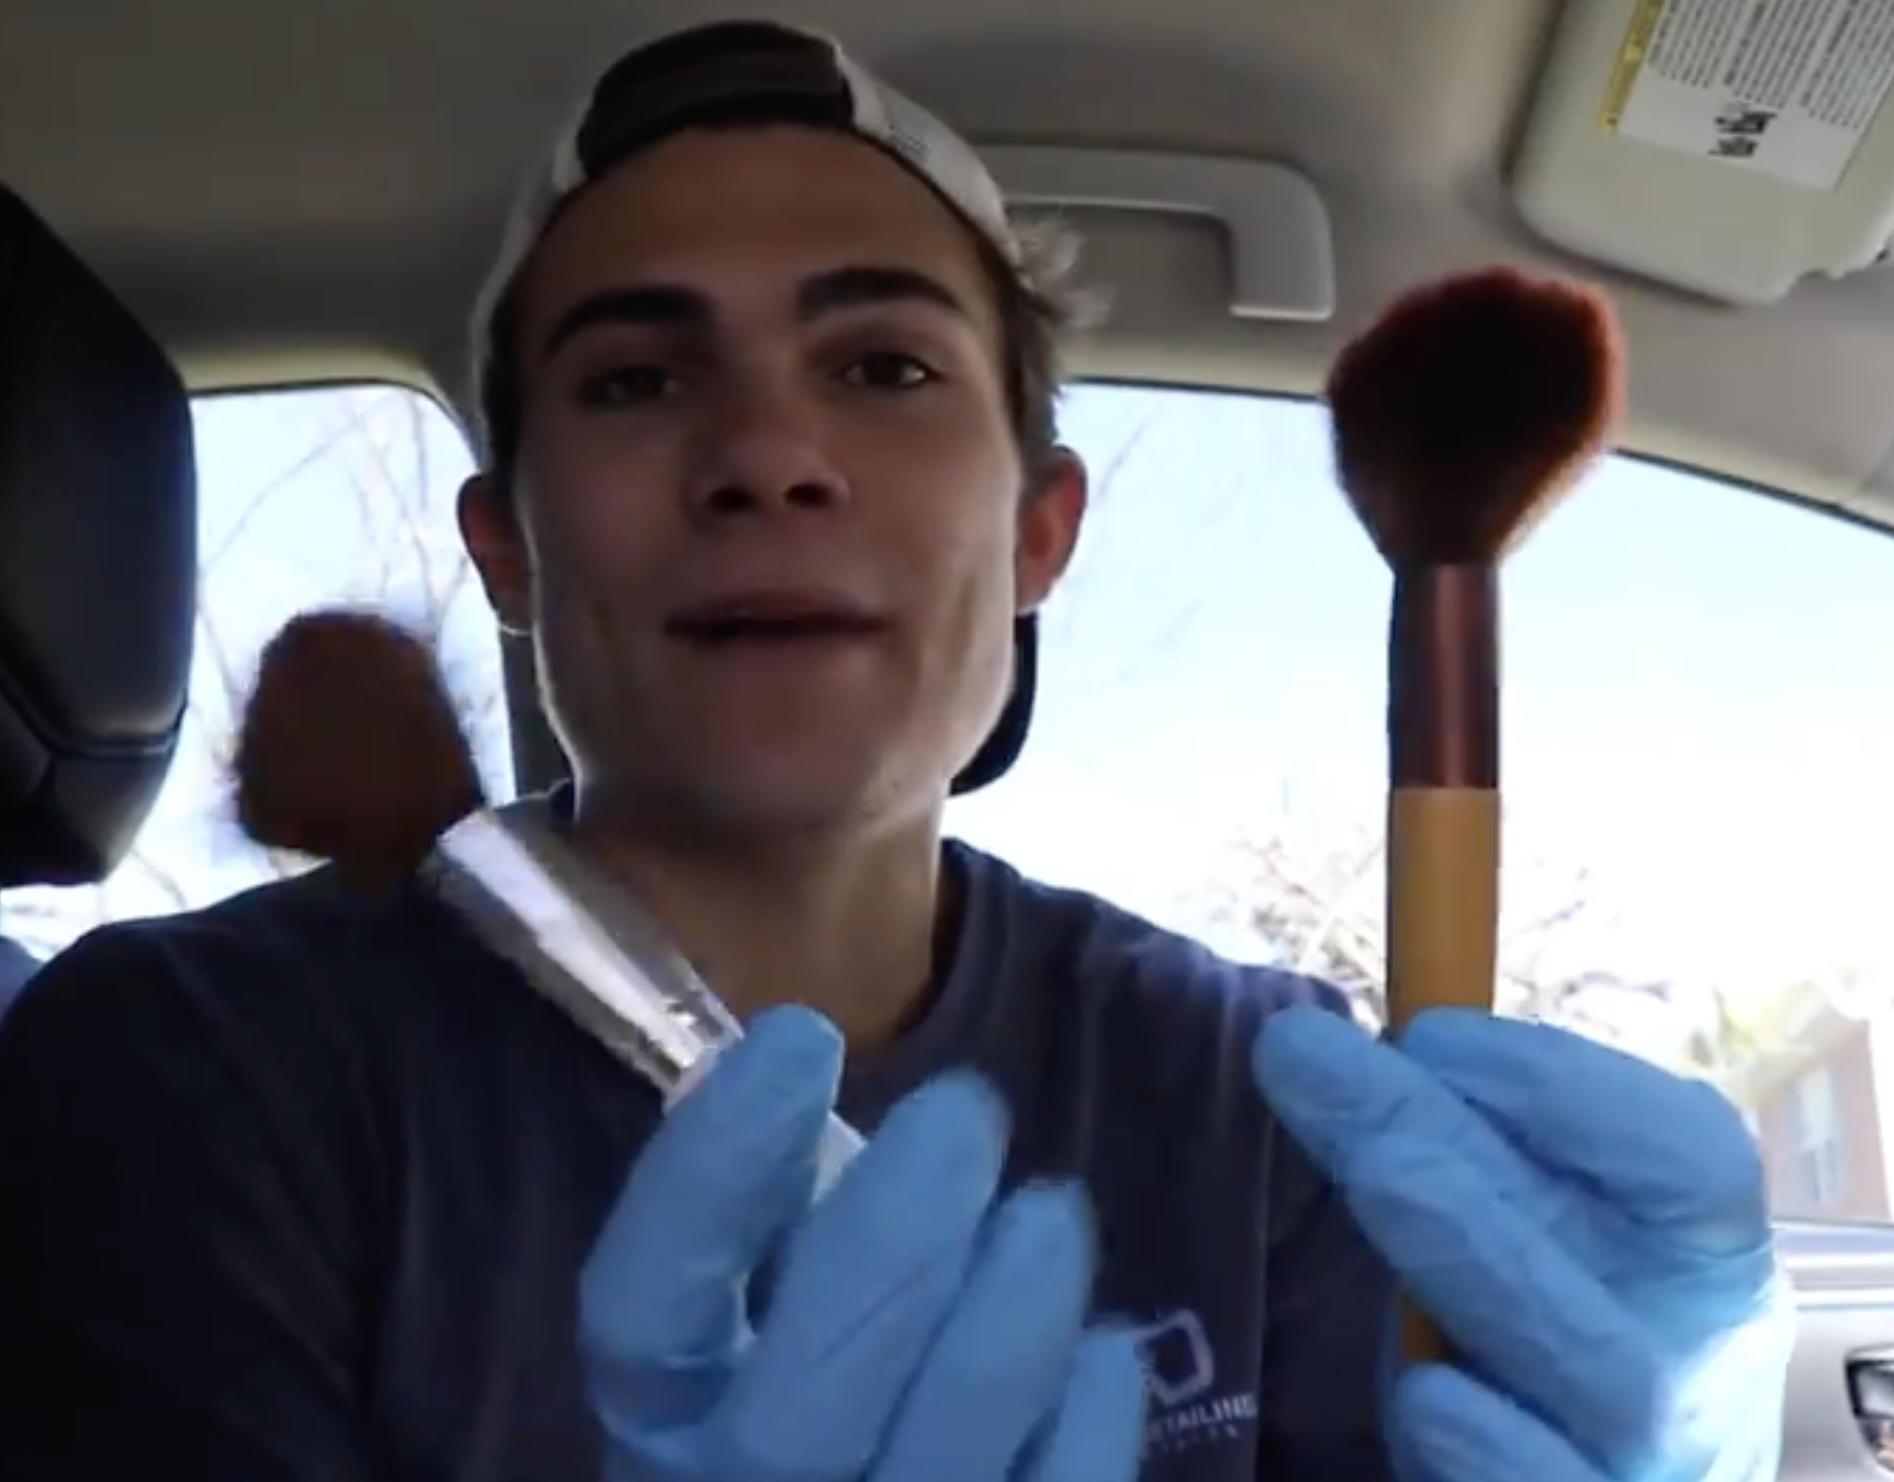 Makeup brushes can be great tools to leave the interior of your car spotless